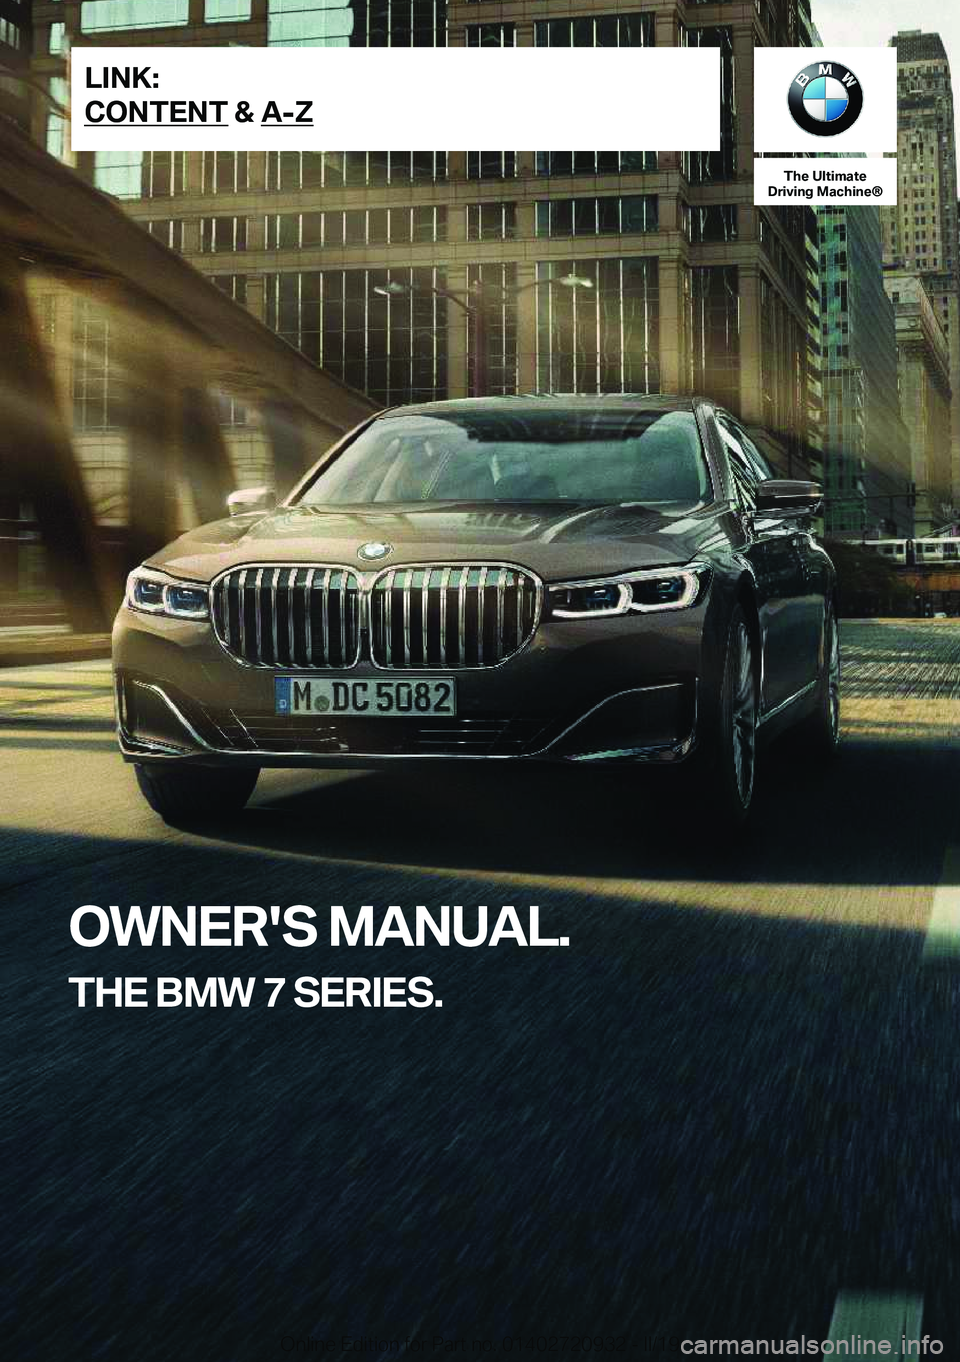 BMW 7 SERIES 2020  Owners Manual �T�h�e��U�l�t�i�m�a�t�e
�D�r�i�v�i�n�g��M�a�c�h�i�n�e�n
�O�W�N�E�R�'�S��M�A�N�U�A�L�.
�T�H�E��B�M�W��7��S�E�R�I�E�S�.�L�I�N�K�:
�C�O�N�T�E�N�T��&��A�-�Z�O�n�l�i�n�e��E�d�i�t�i�o�n��f�o�r